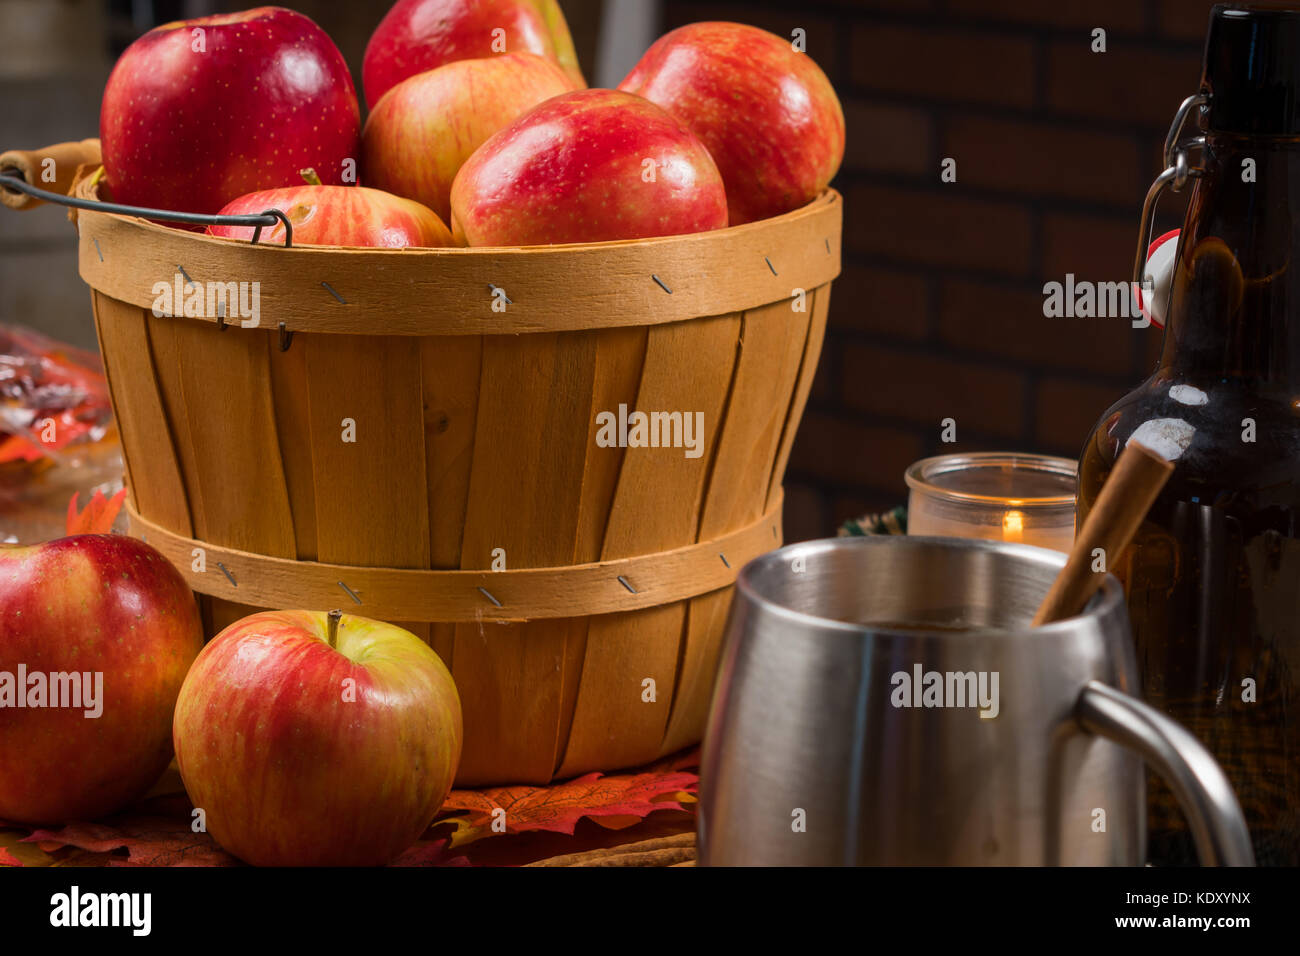 Wooden basket of apples with a cup and bottle Stock Photo